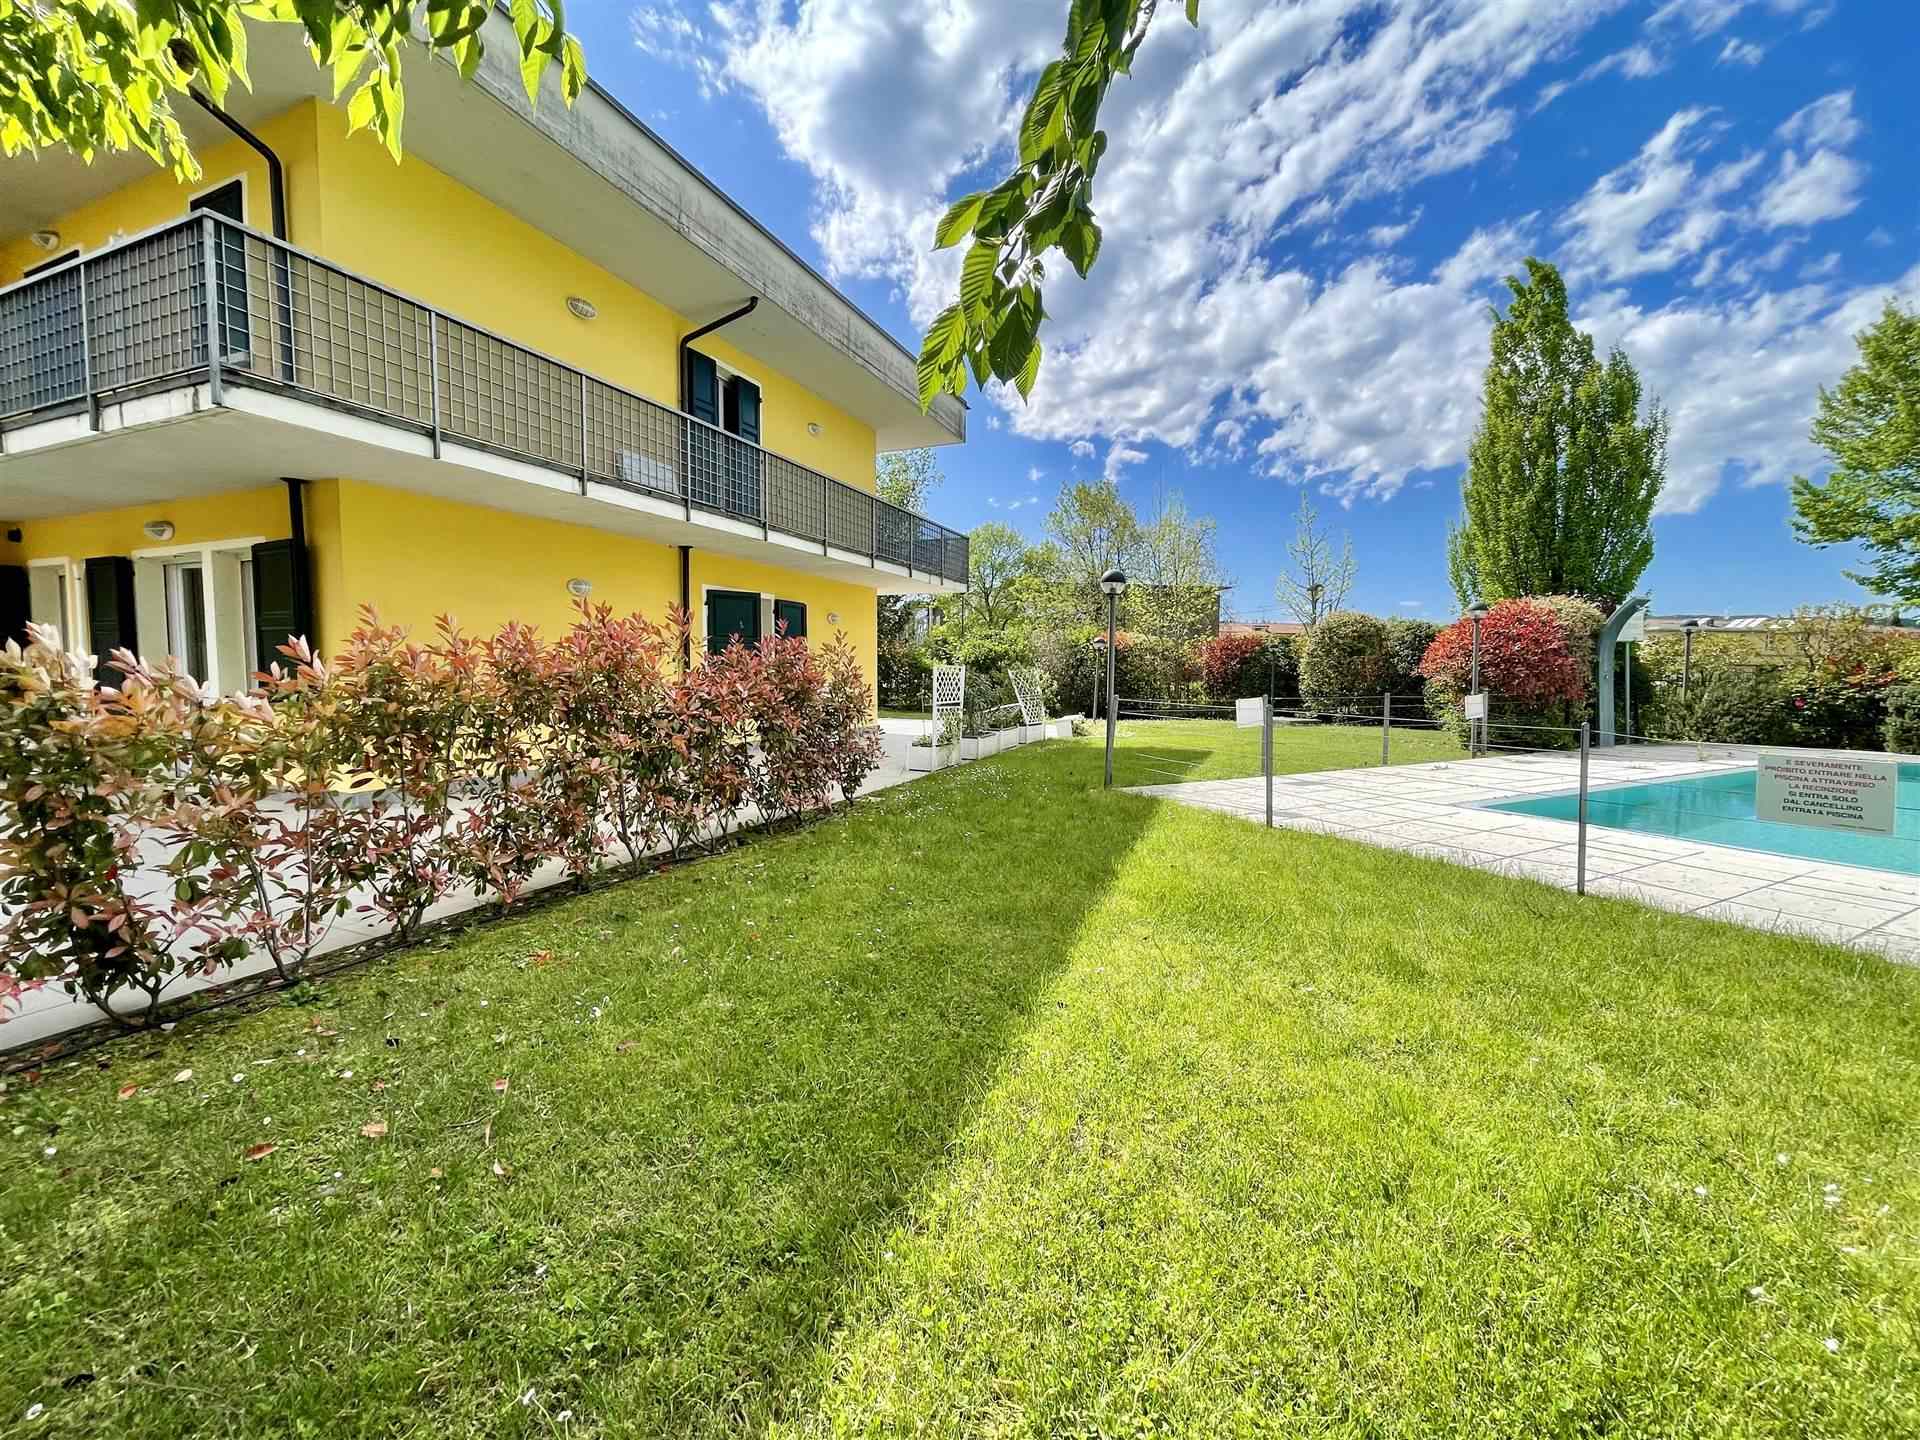 MANERBA DEL GARDA, Duplex villa for sale of 145 Sq. mt., Heating Individual heating system, Energetic class: B, placed at Ground, composed by: 5 Rooms, Separate kitchen, , 3 Bedrooms, 2 Bathrooms, 